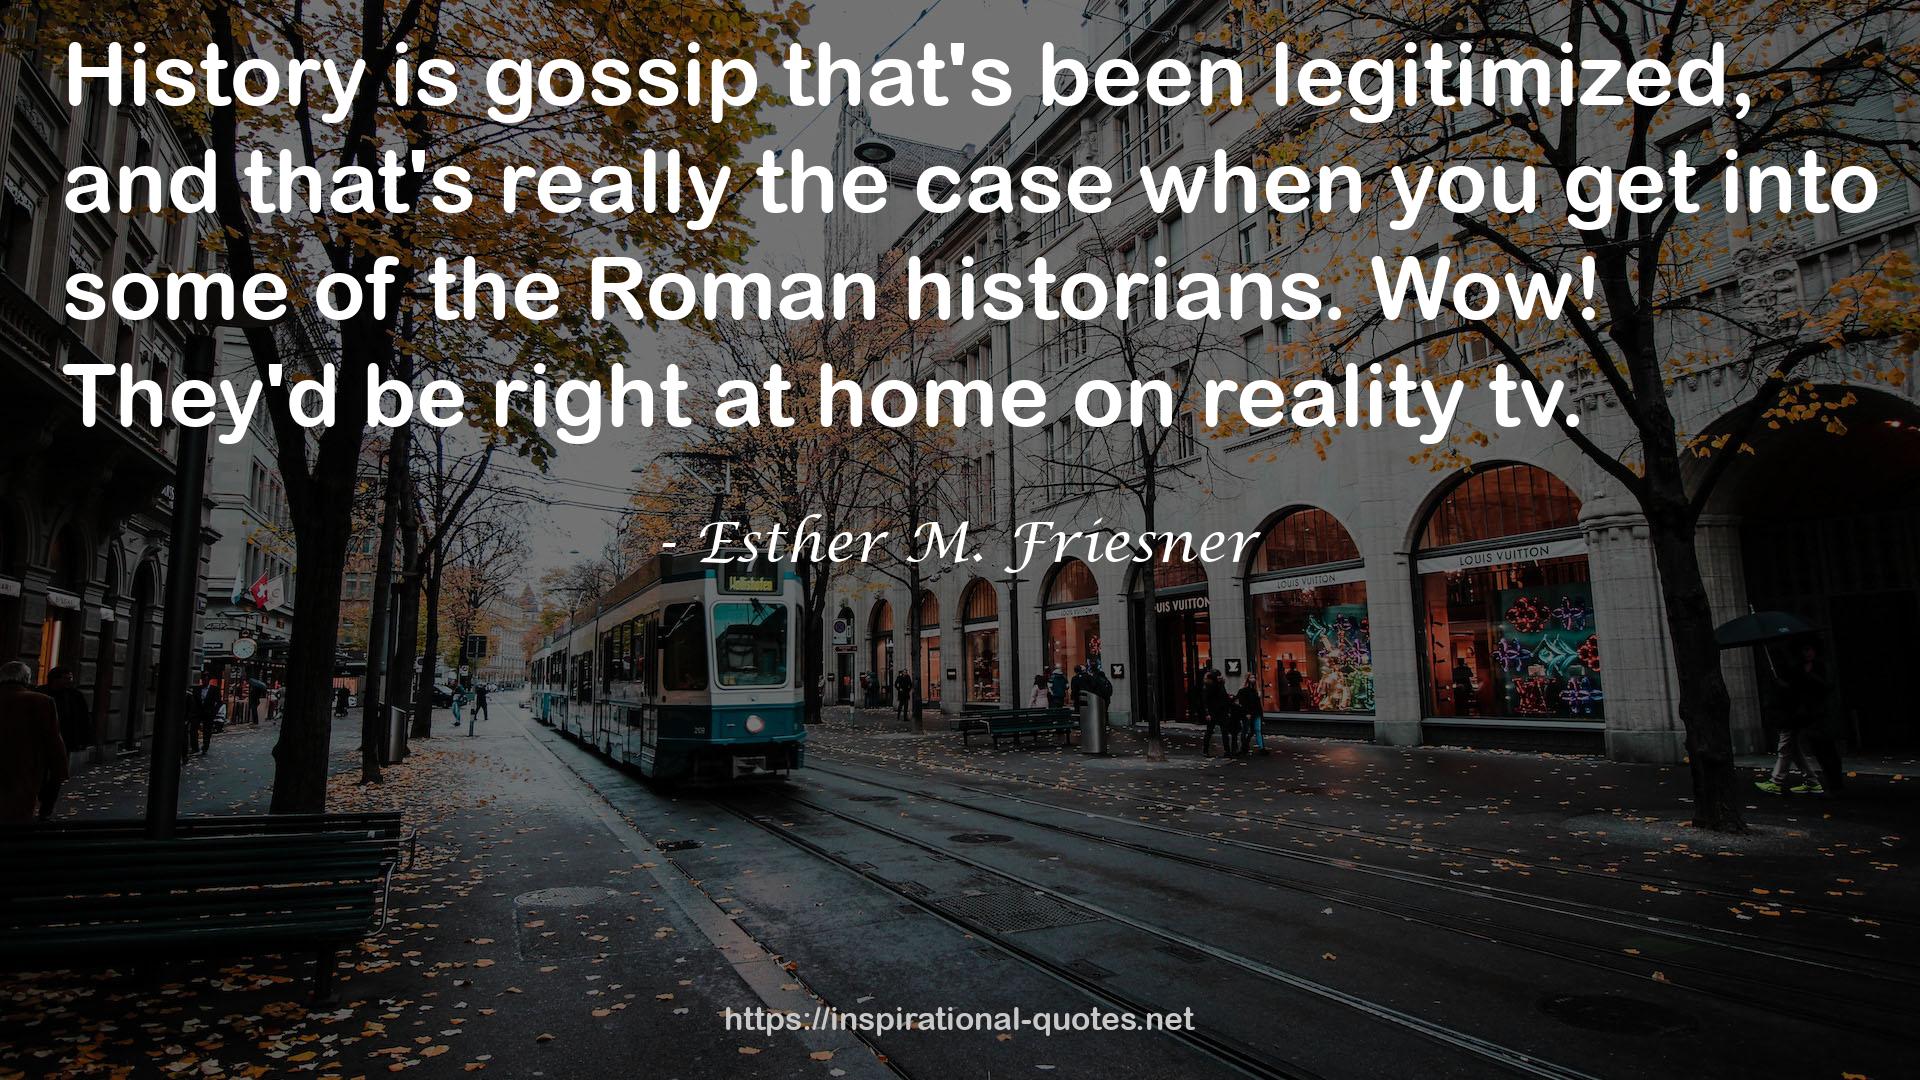 Esther M. Friesner QUOTES